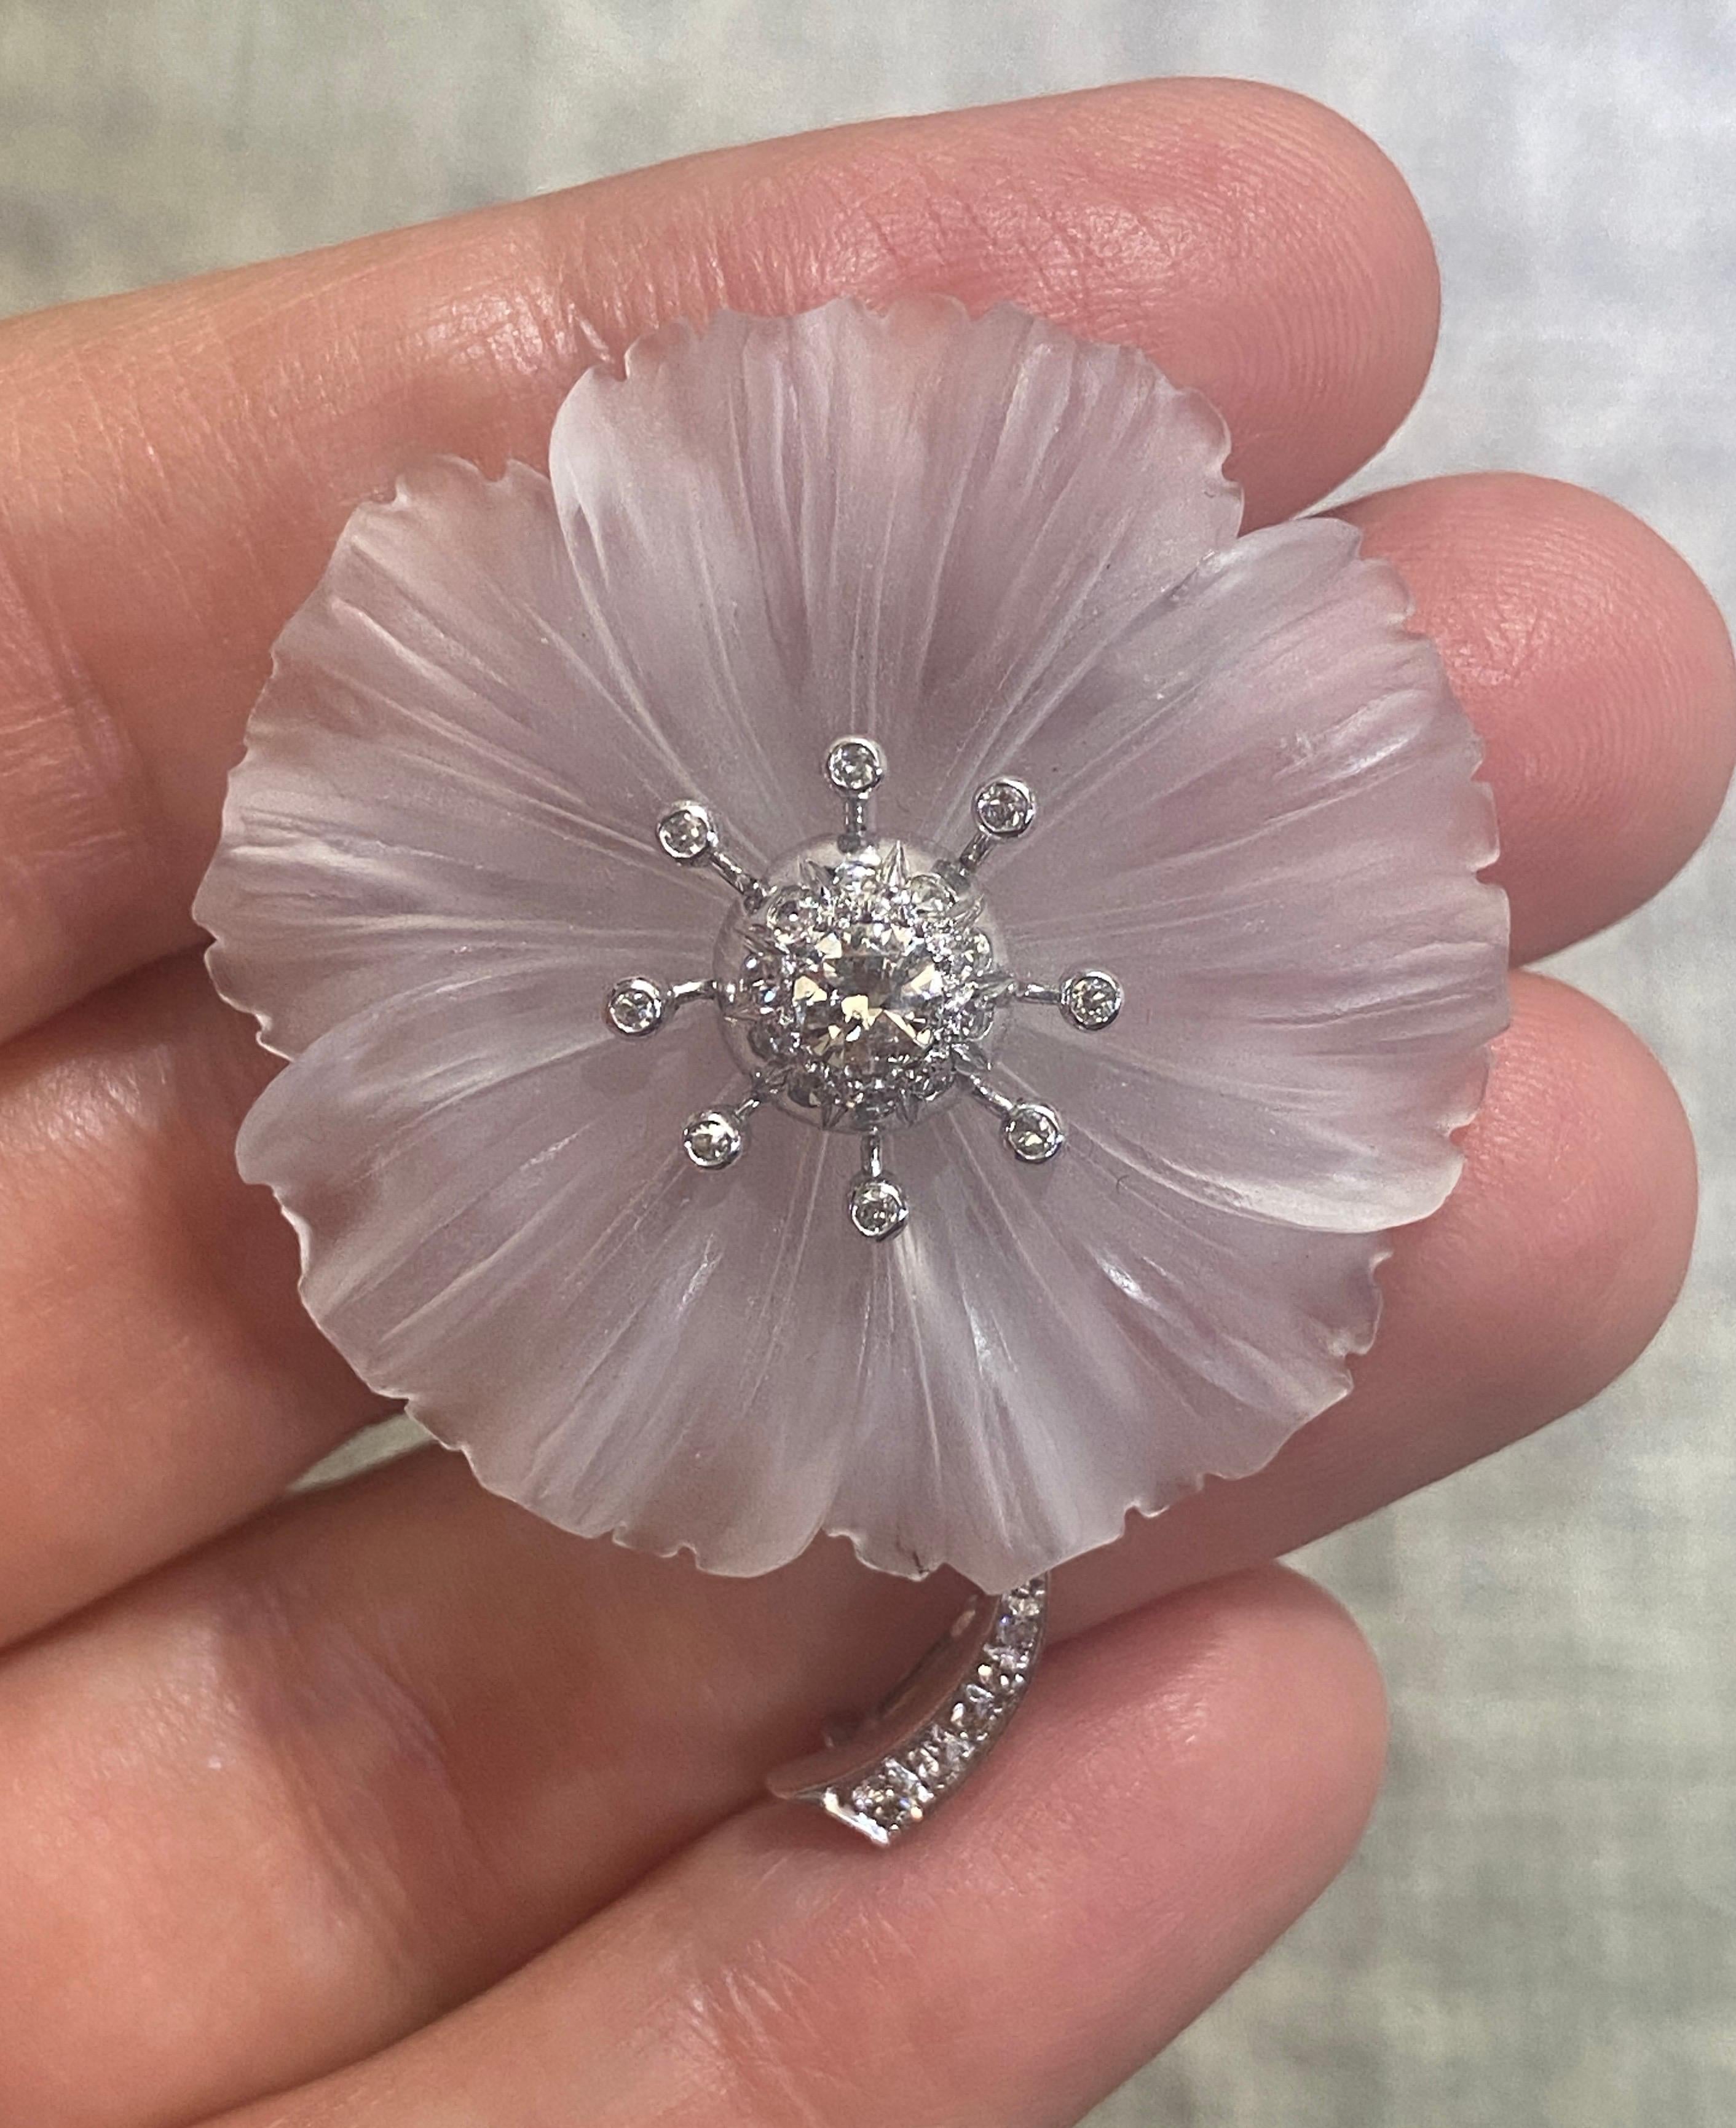 This is a stunningly elegant rock crystal and diamond brooch made in Austria in 1930s. The rock crystal is masterfully carved and gives the appearance of translucent petals on the flower. Although almost a century old, this brooch is as wearable